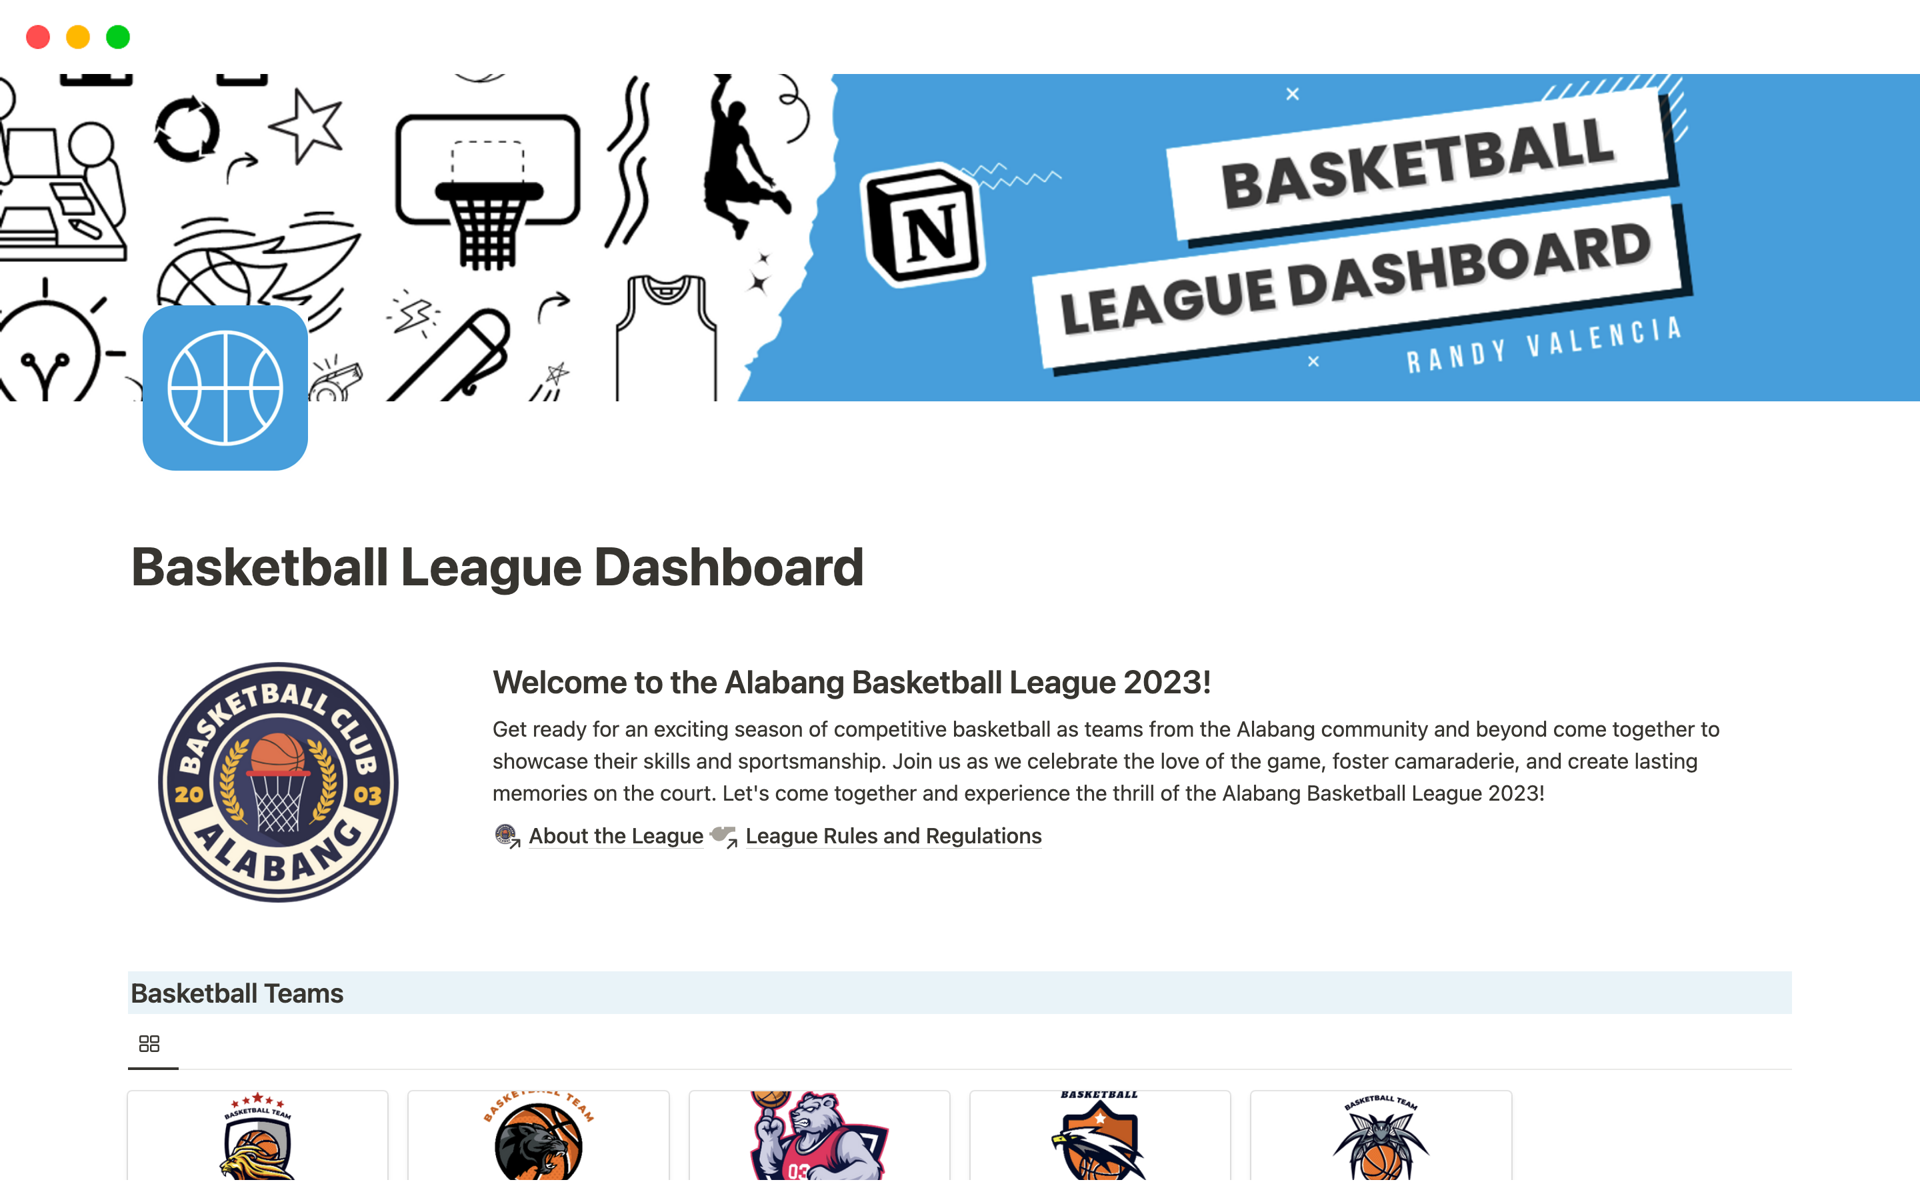 The Basketball League Dashboard template revolutionizes league management by providing a centralized hub for effortlessly organizing and tracking team standings, players, game schedules, box scores, leaderboards, news, and videos.